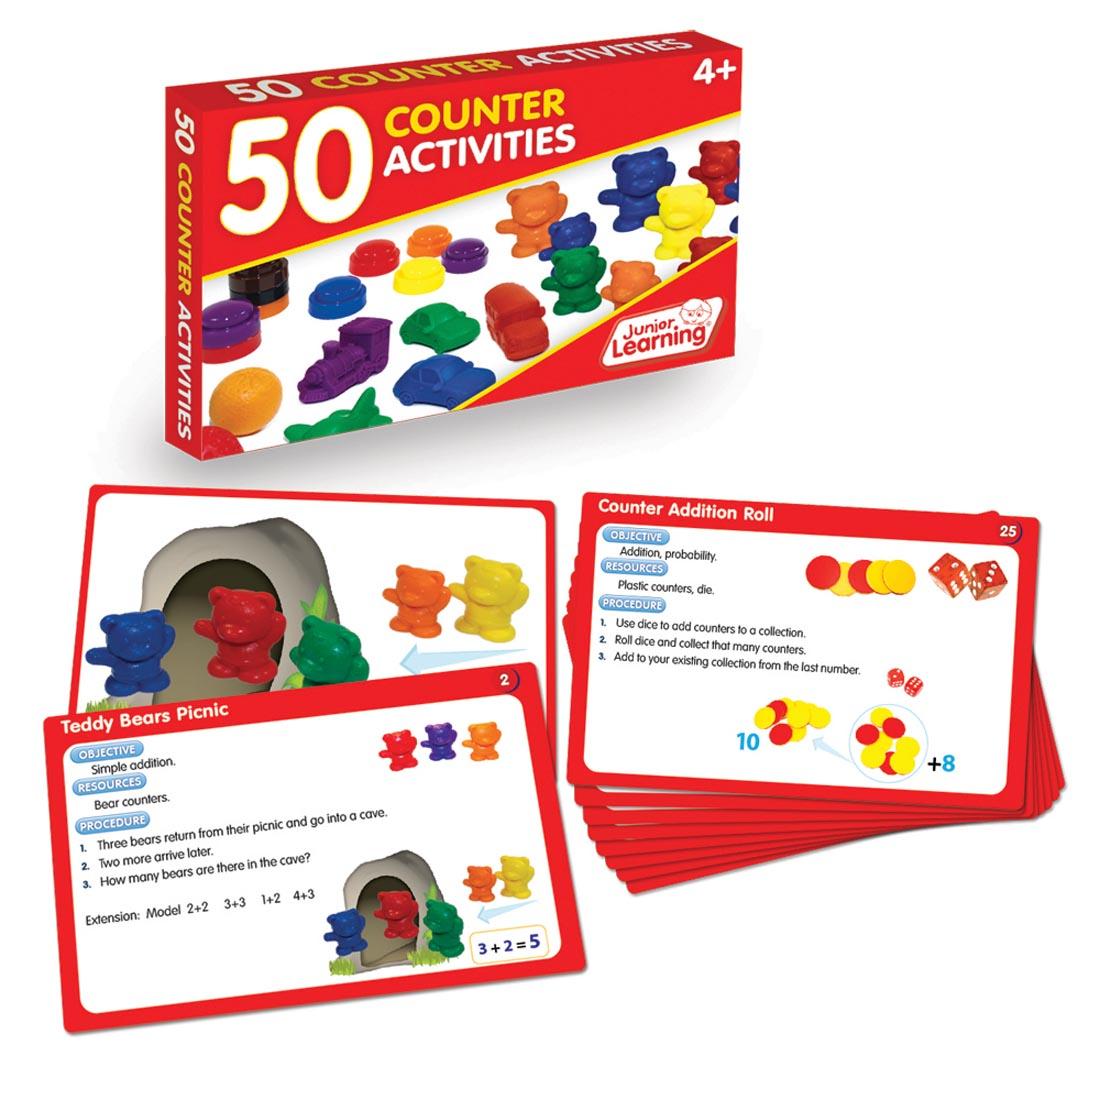 50 Counter Activities by Junior Learning